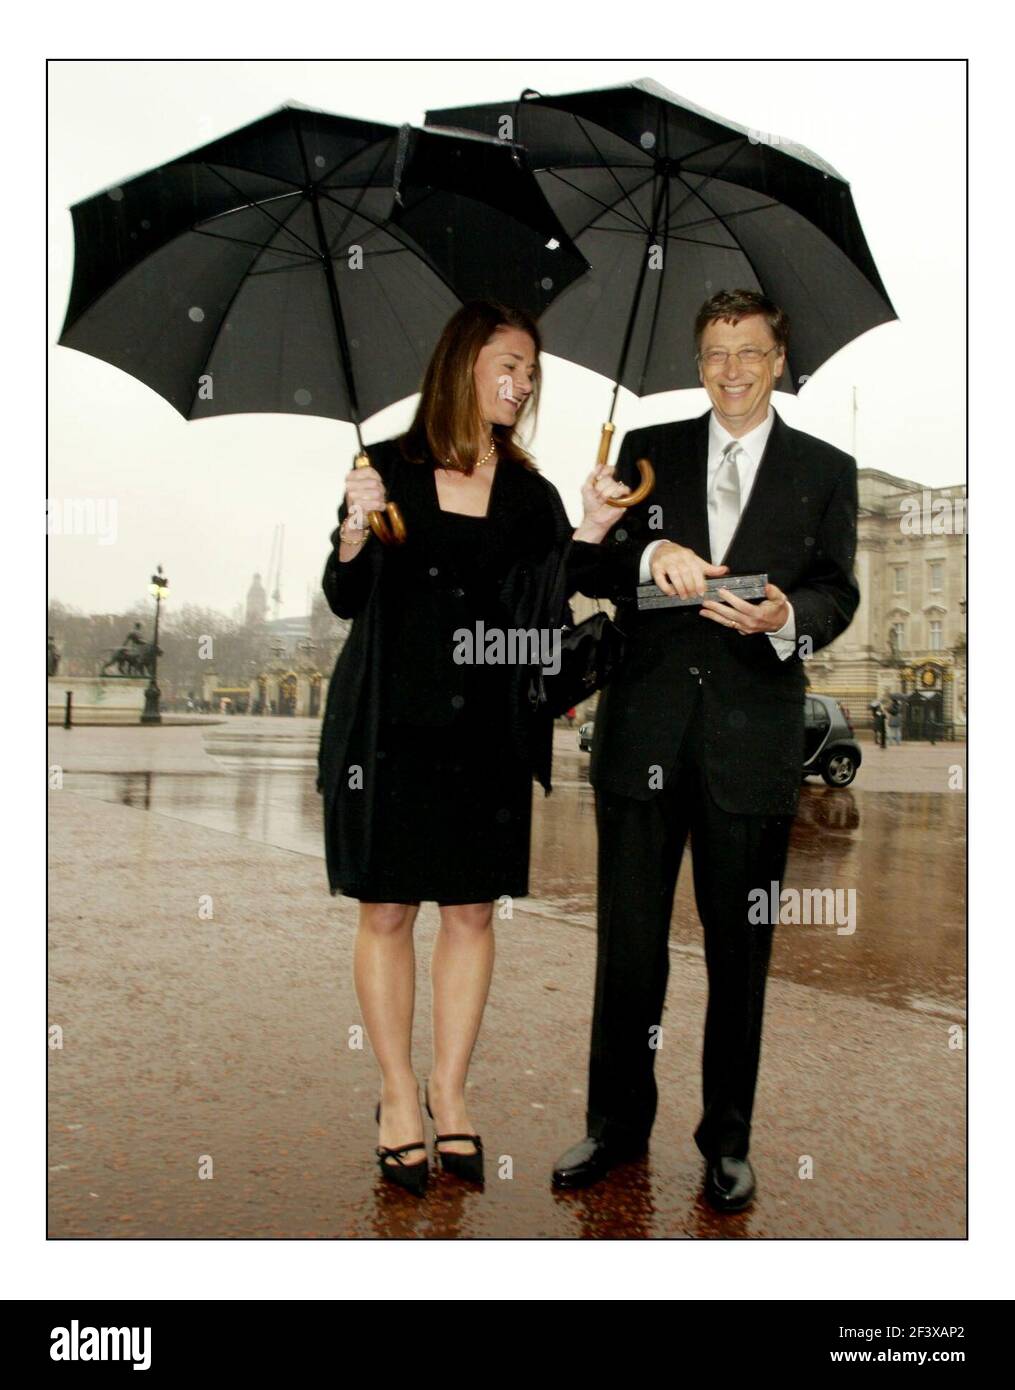 Bill Gates, co-founder of the Bill & Melinda Gates Foundation and chairman of Microsoft Corp. Poses with his wife Melinda outside Buckingham Palace after recieving his honarary knighthood from Queen Elizabeth today.pic David Sandison 2/3/2005 Stock Photo